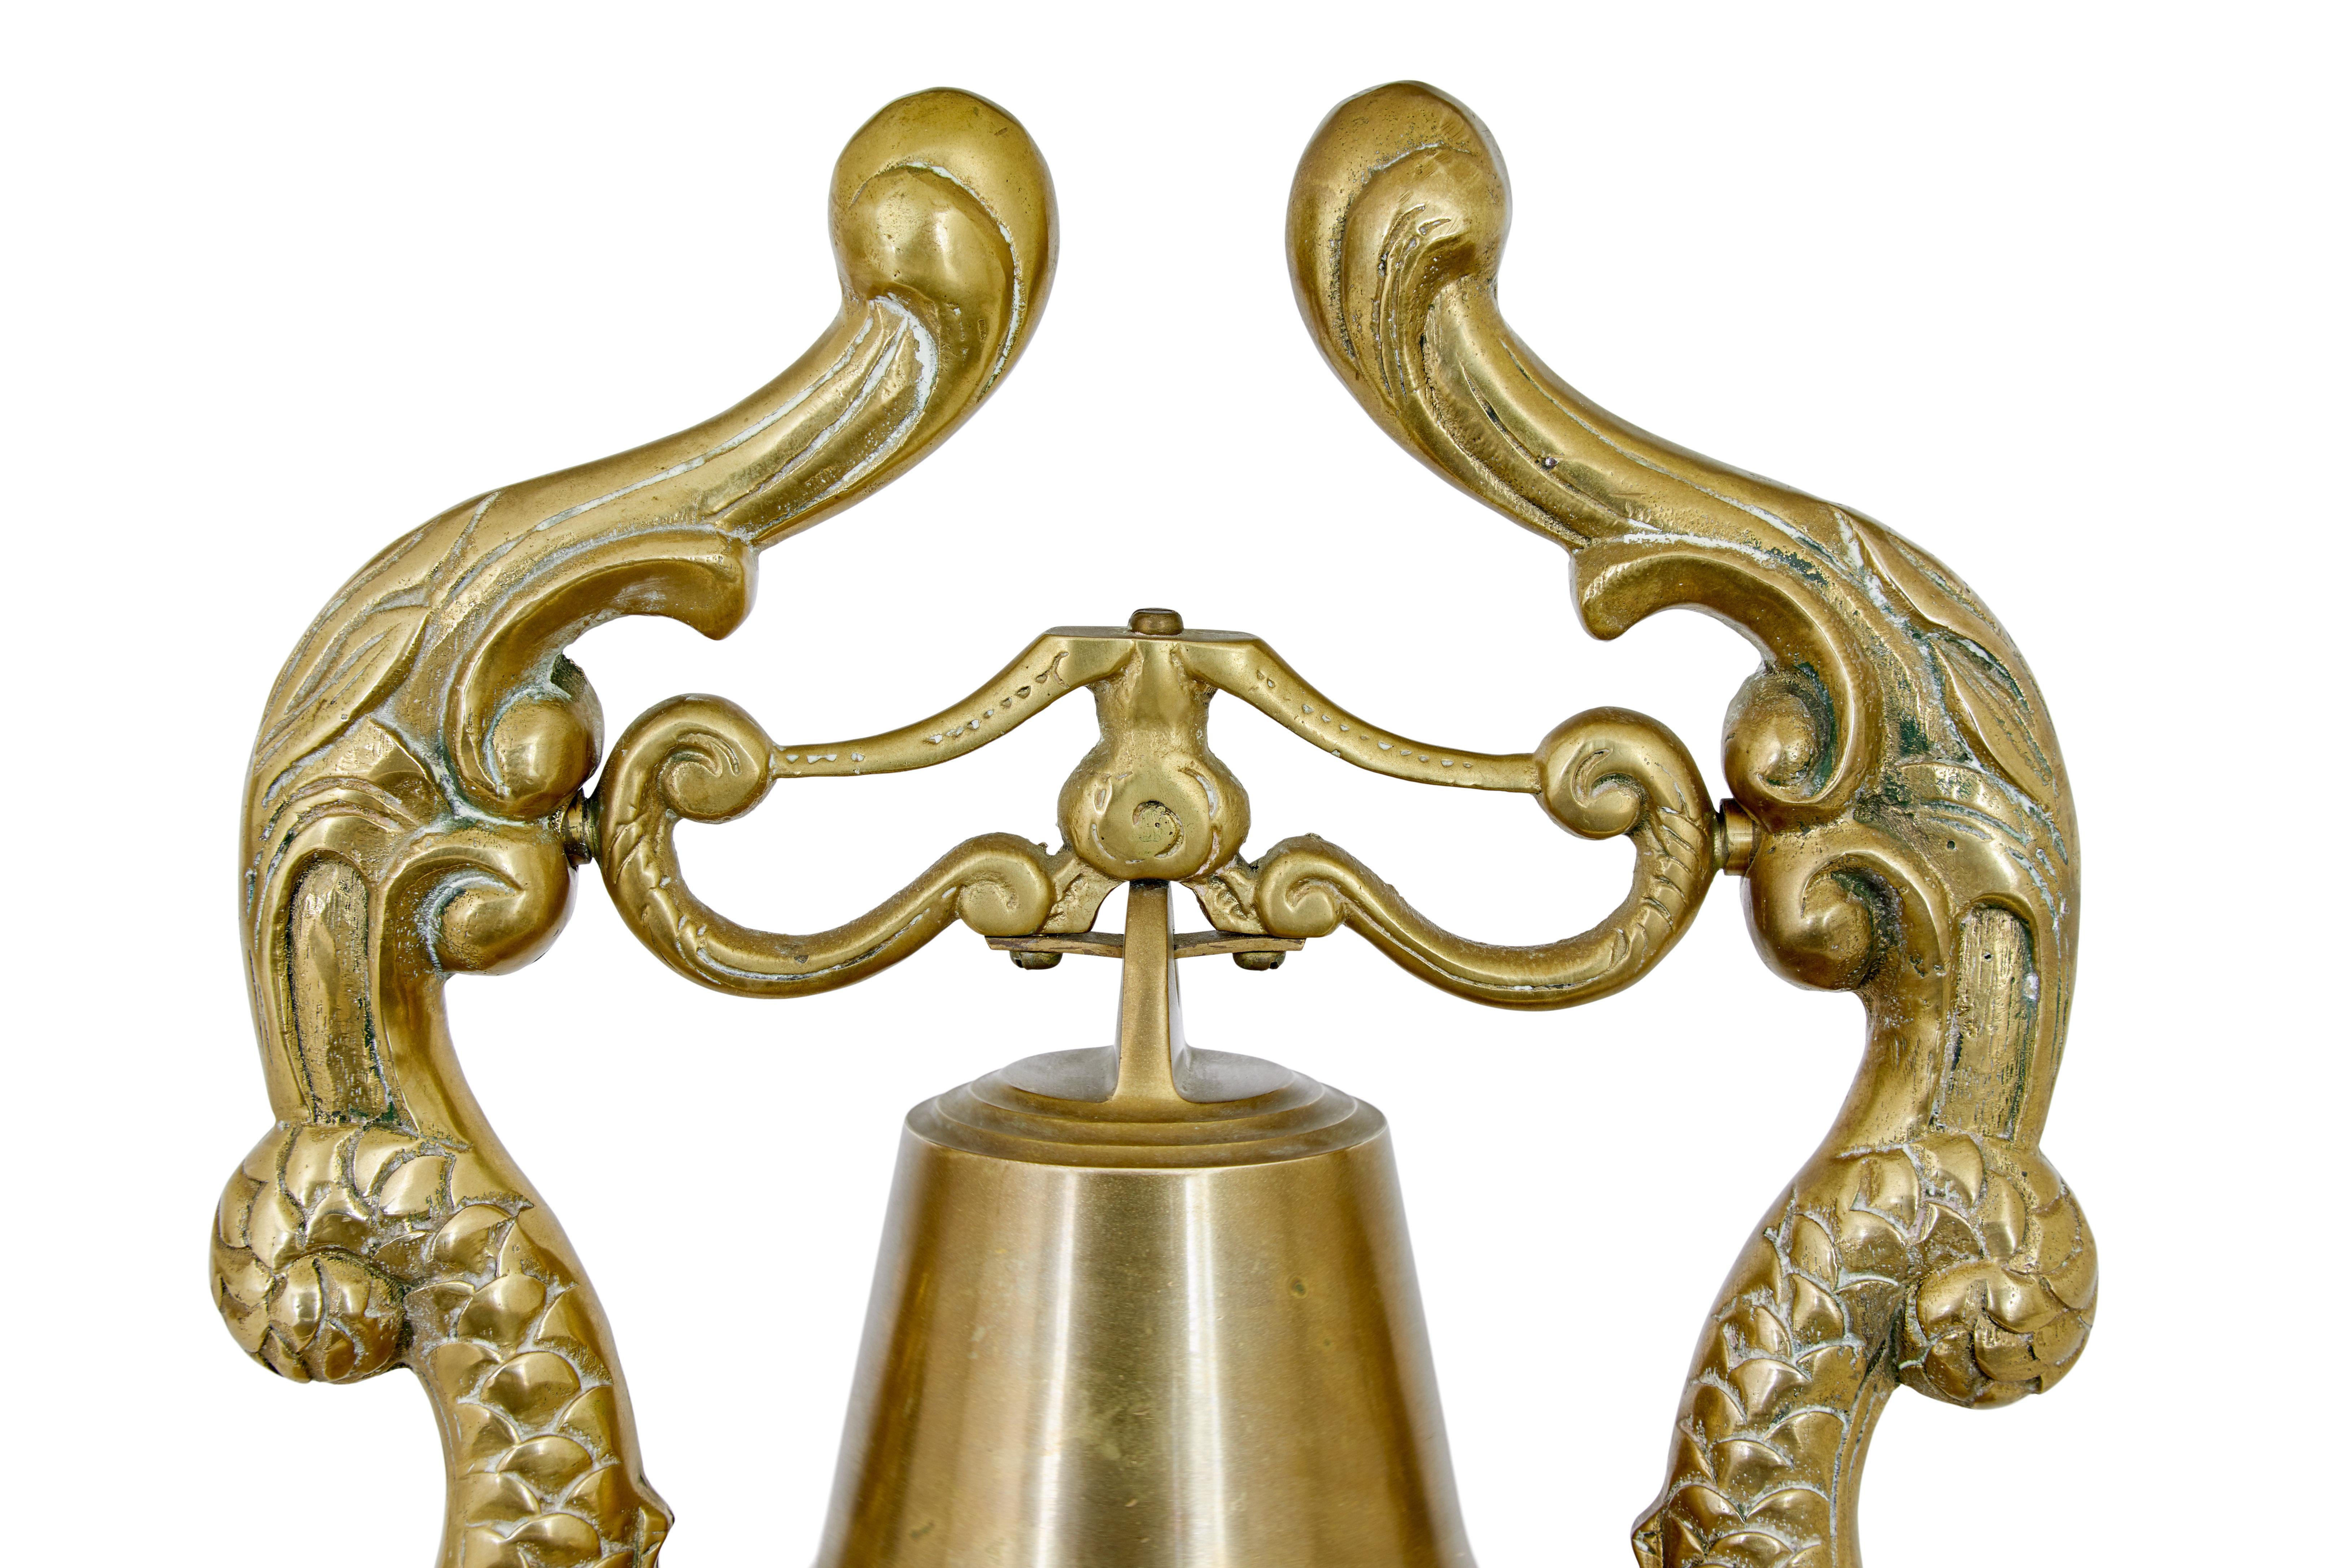 19th Century 19th century Victorian brass decorative dinner bell For Sale